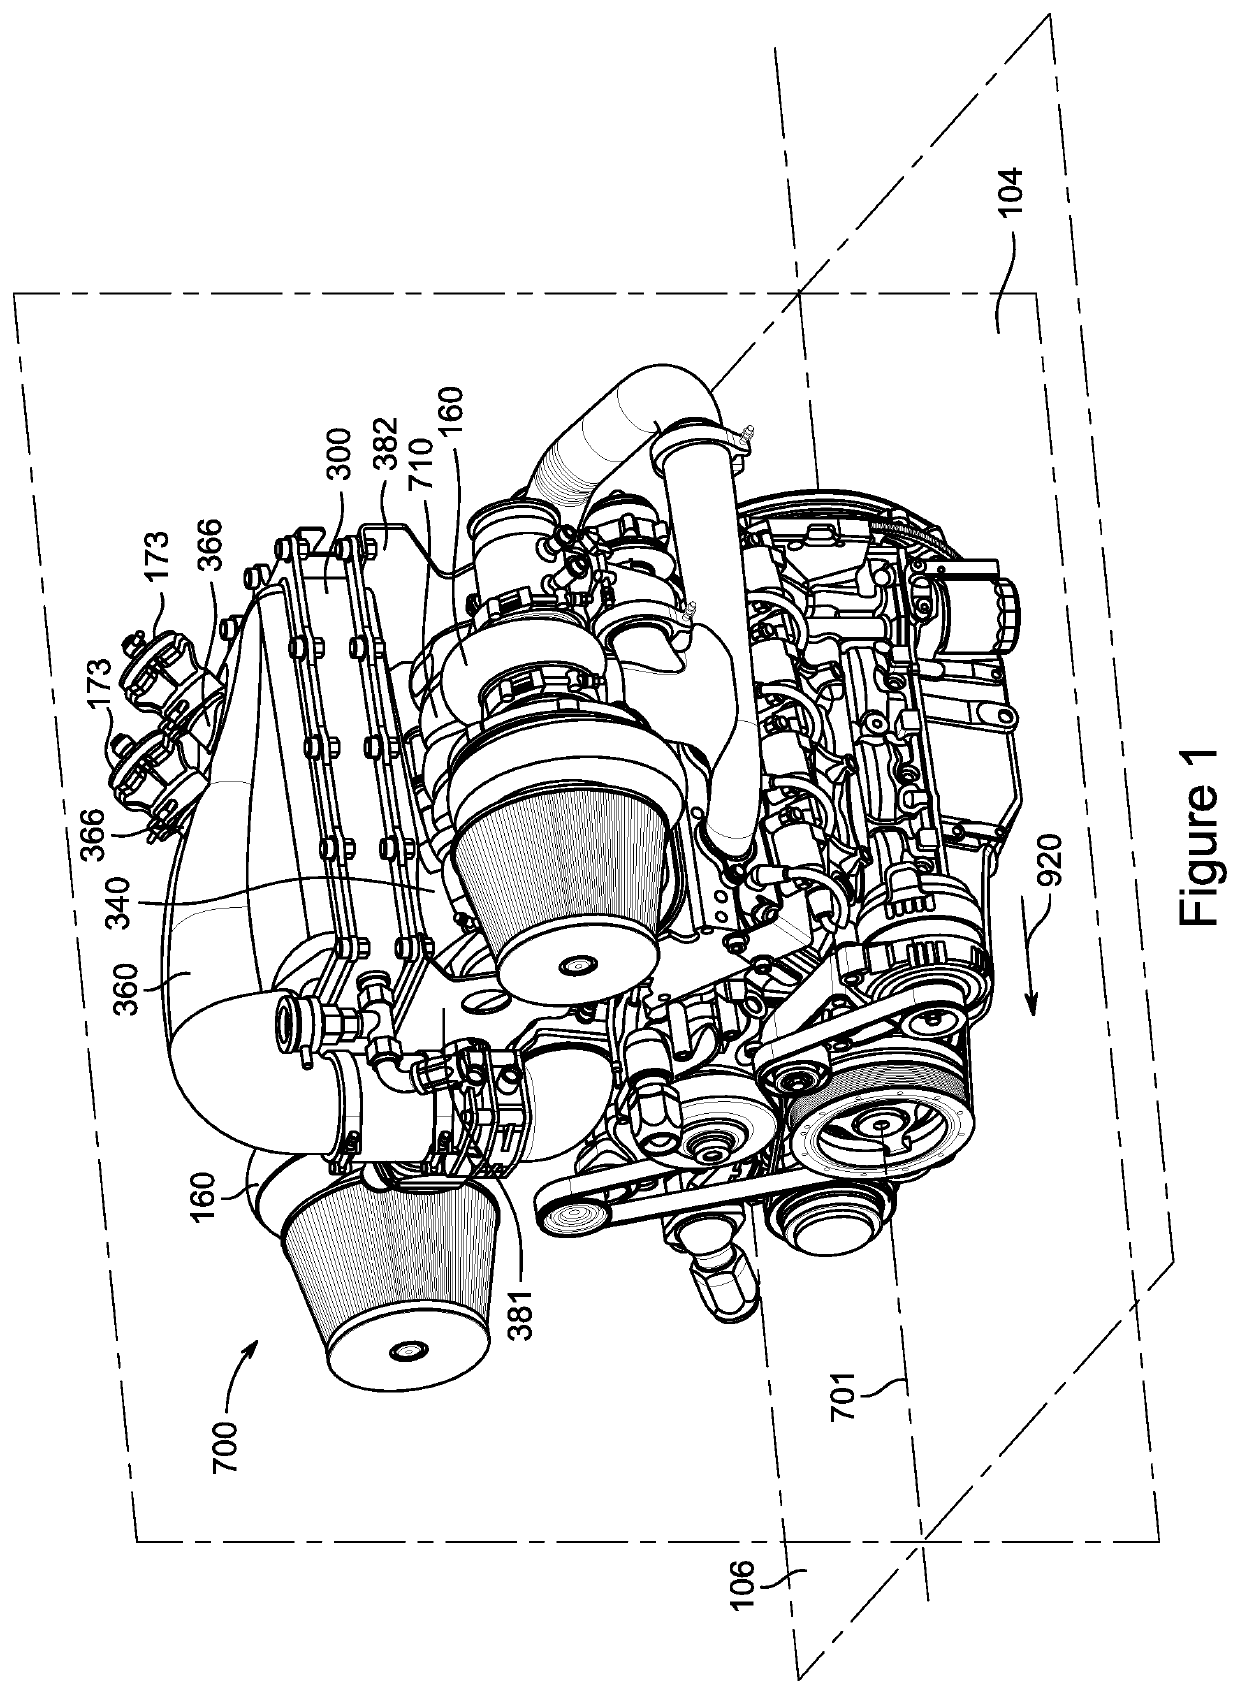 Intake Air Systems and Components